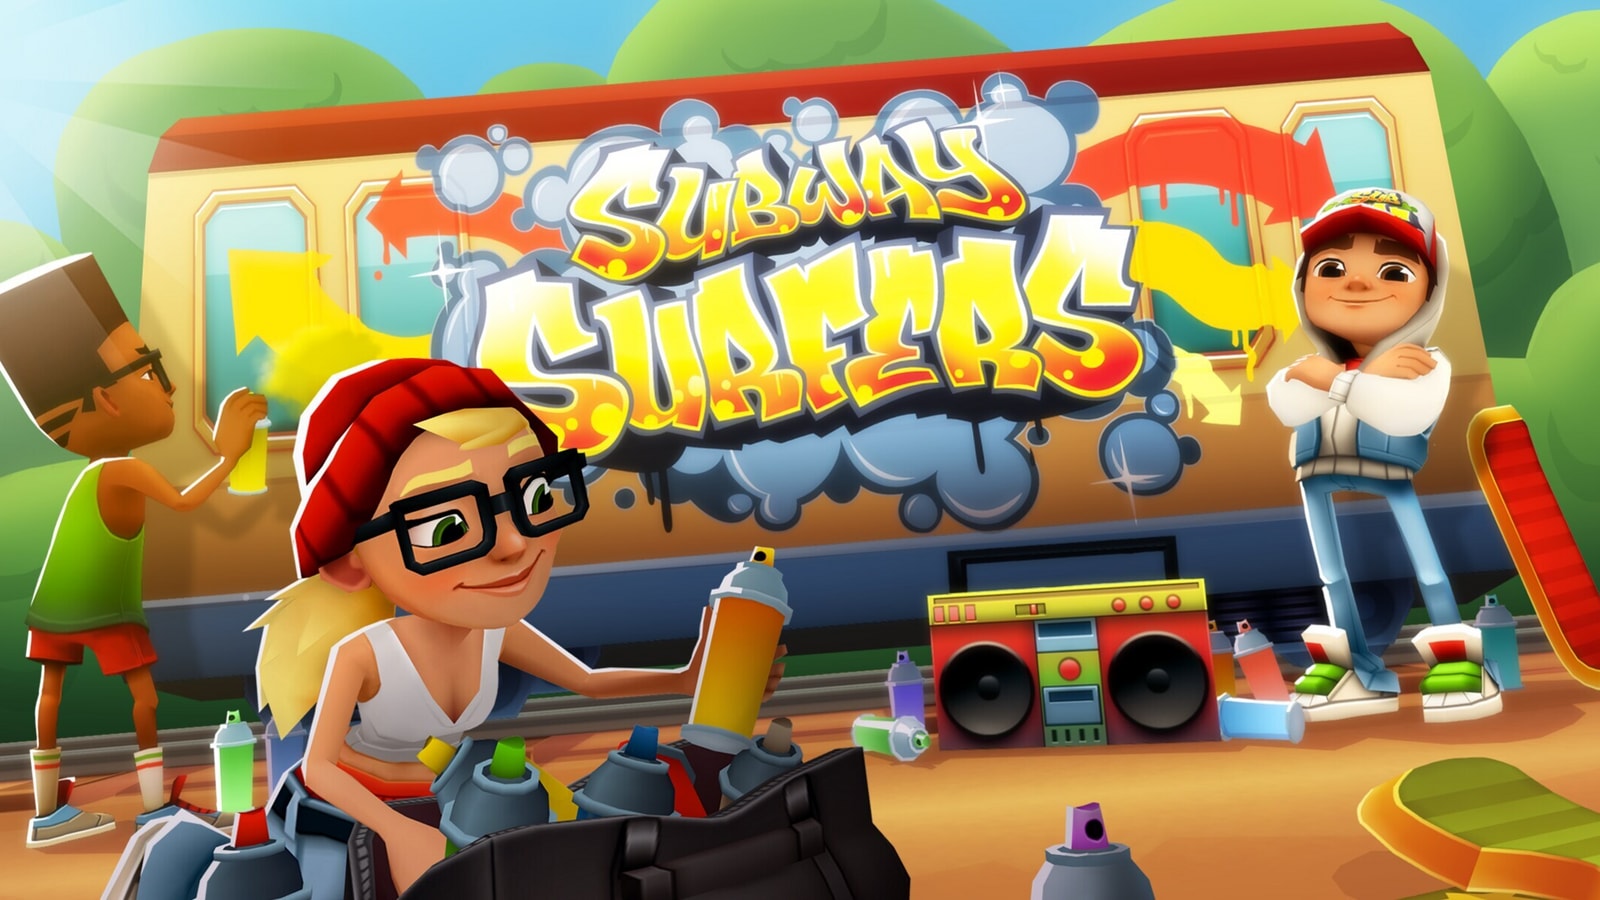 From Subway Surfers to Temple Run, here are 5 most downloaded